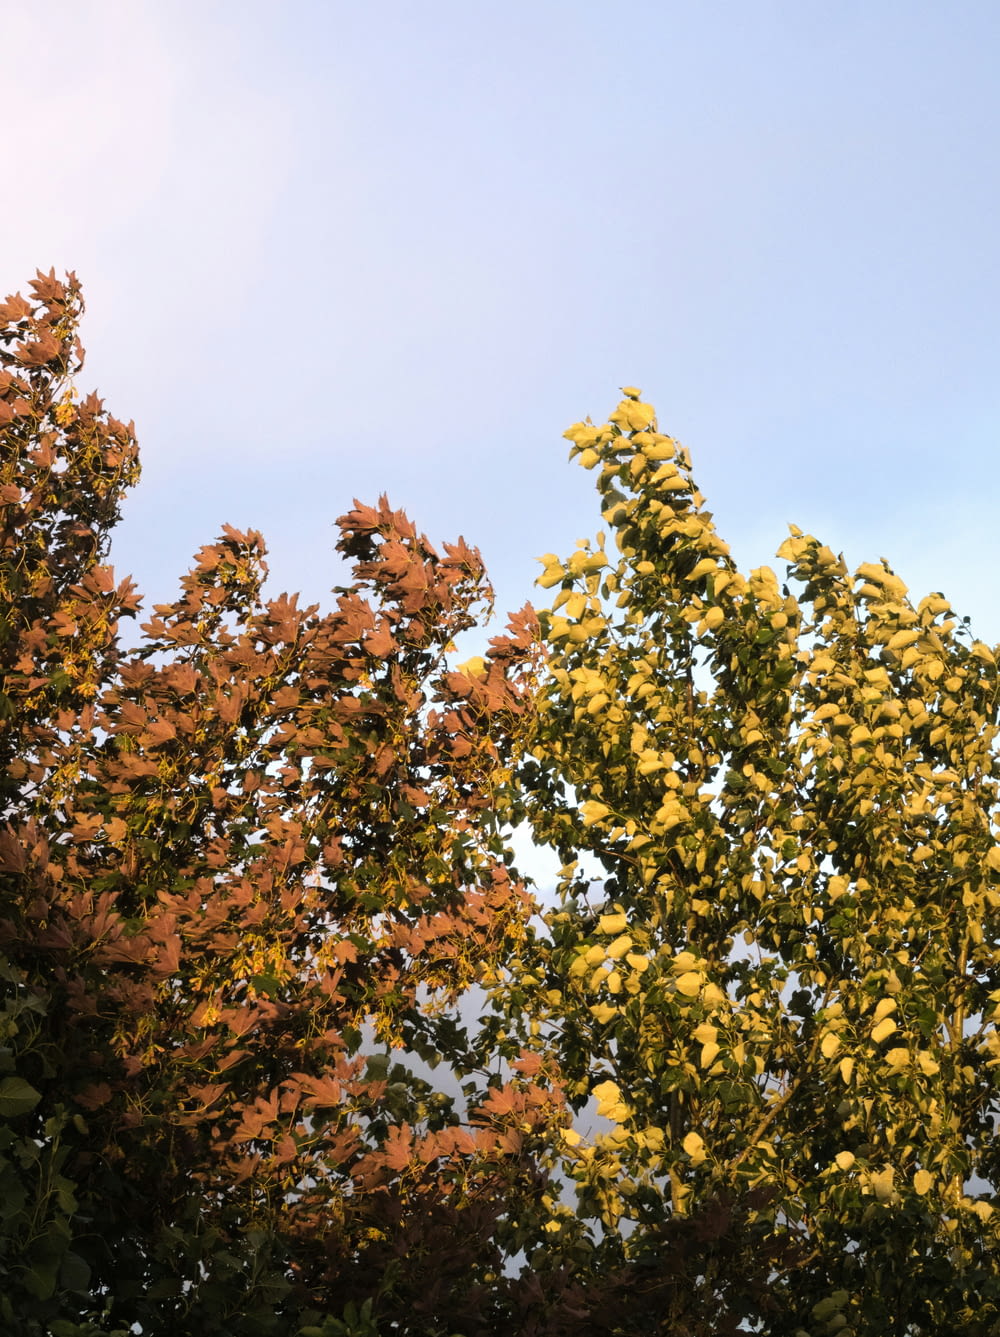 trees with yellow leaves against a blue sky